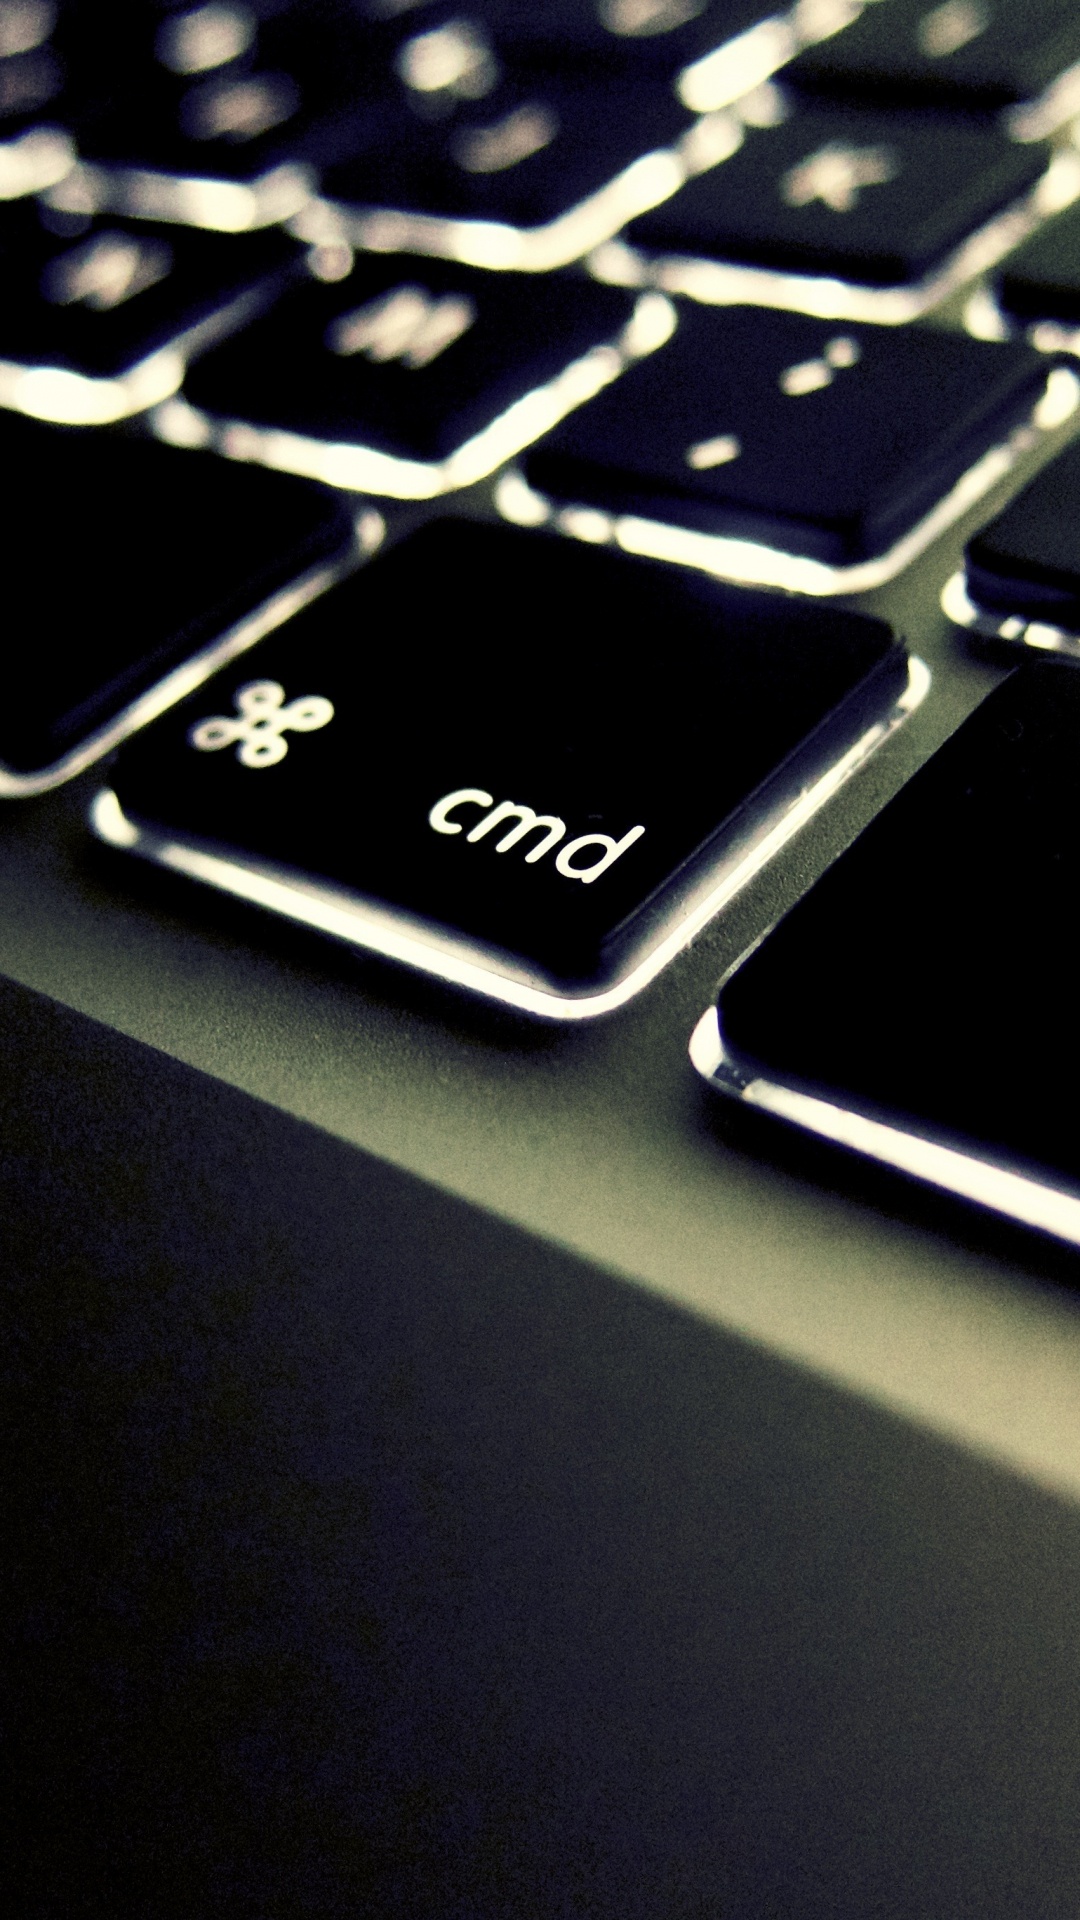 Input Device, Technology, Electronic Device, Space Bar, High Tech. Wallpaper in 1080x1920 Resolution